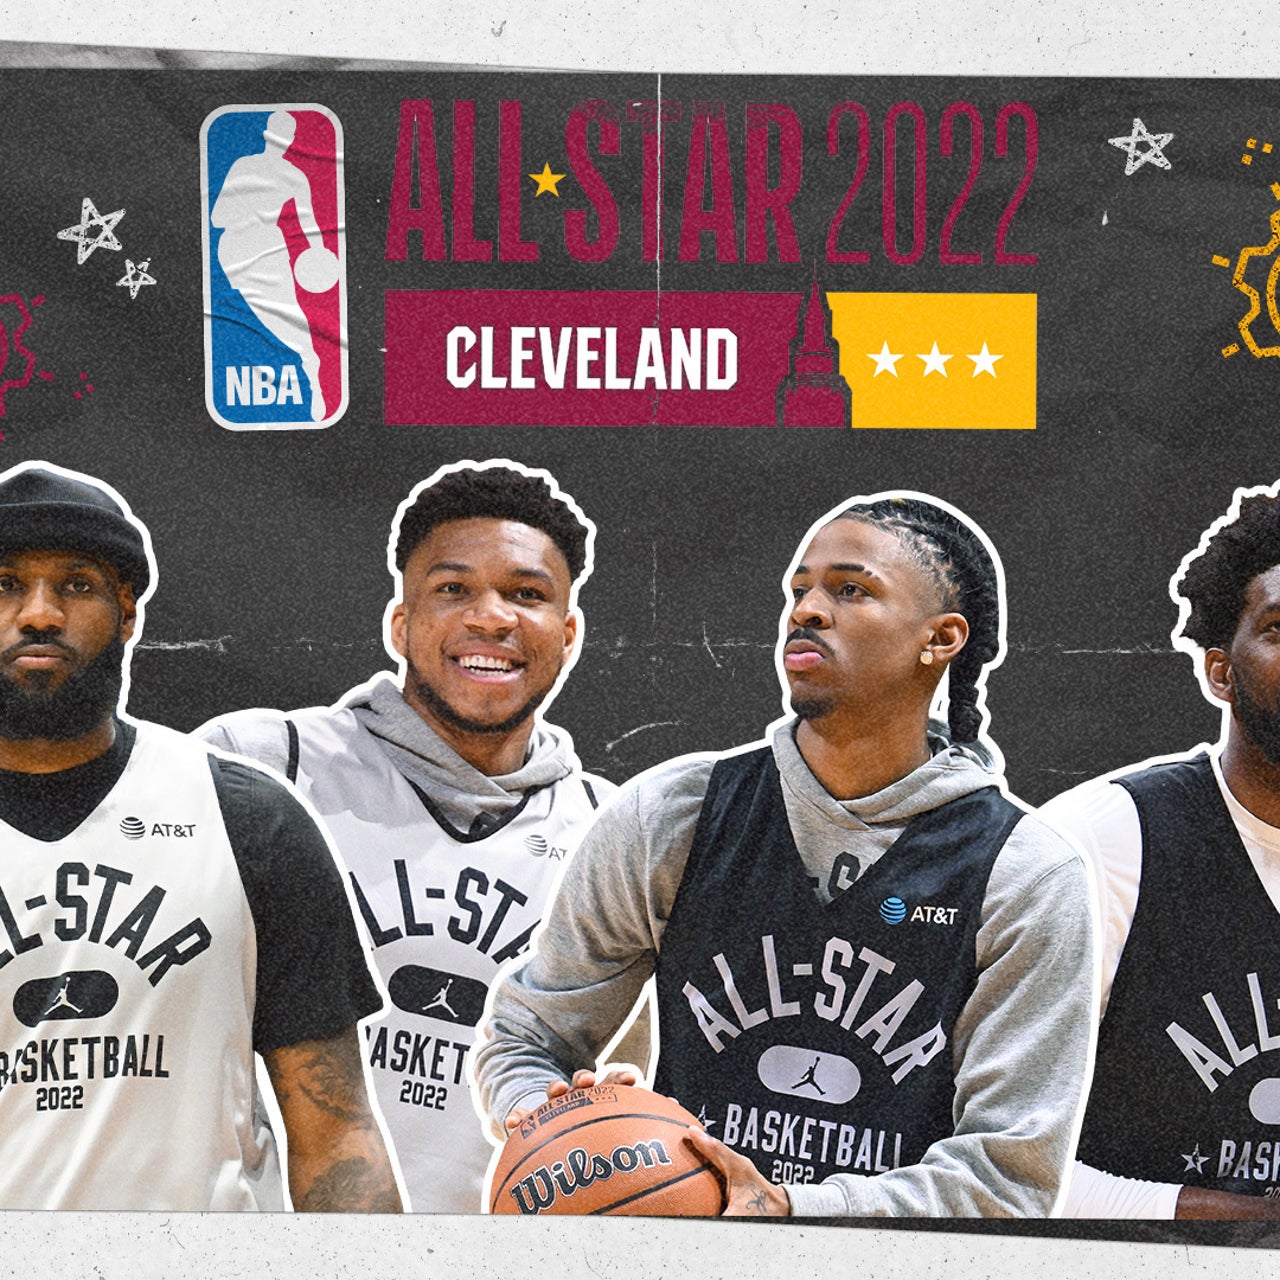 All-Star host Cavaliers getting chance to strut their stuff - West